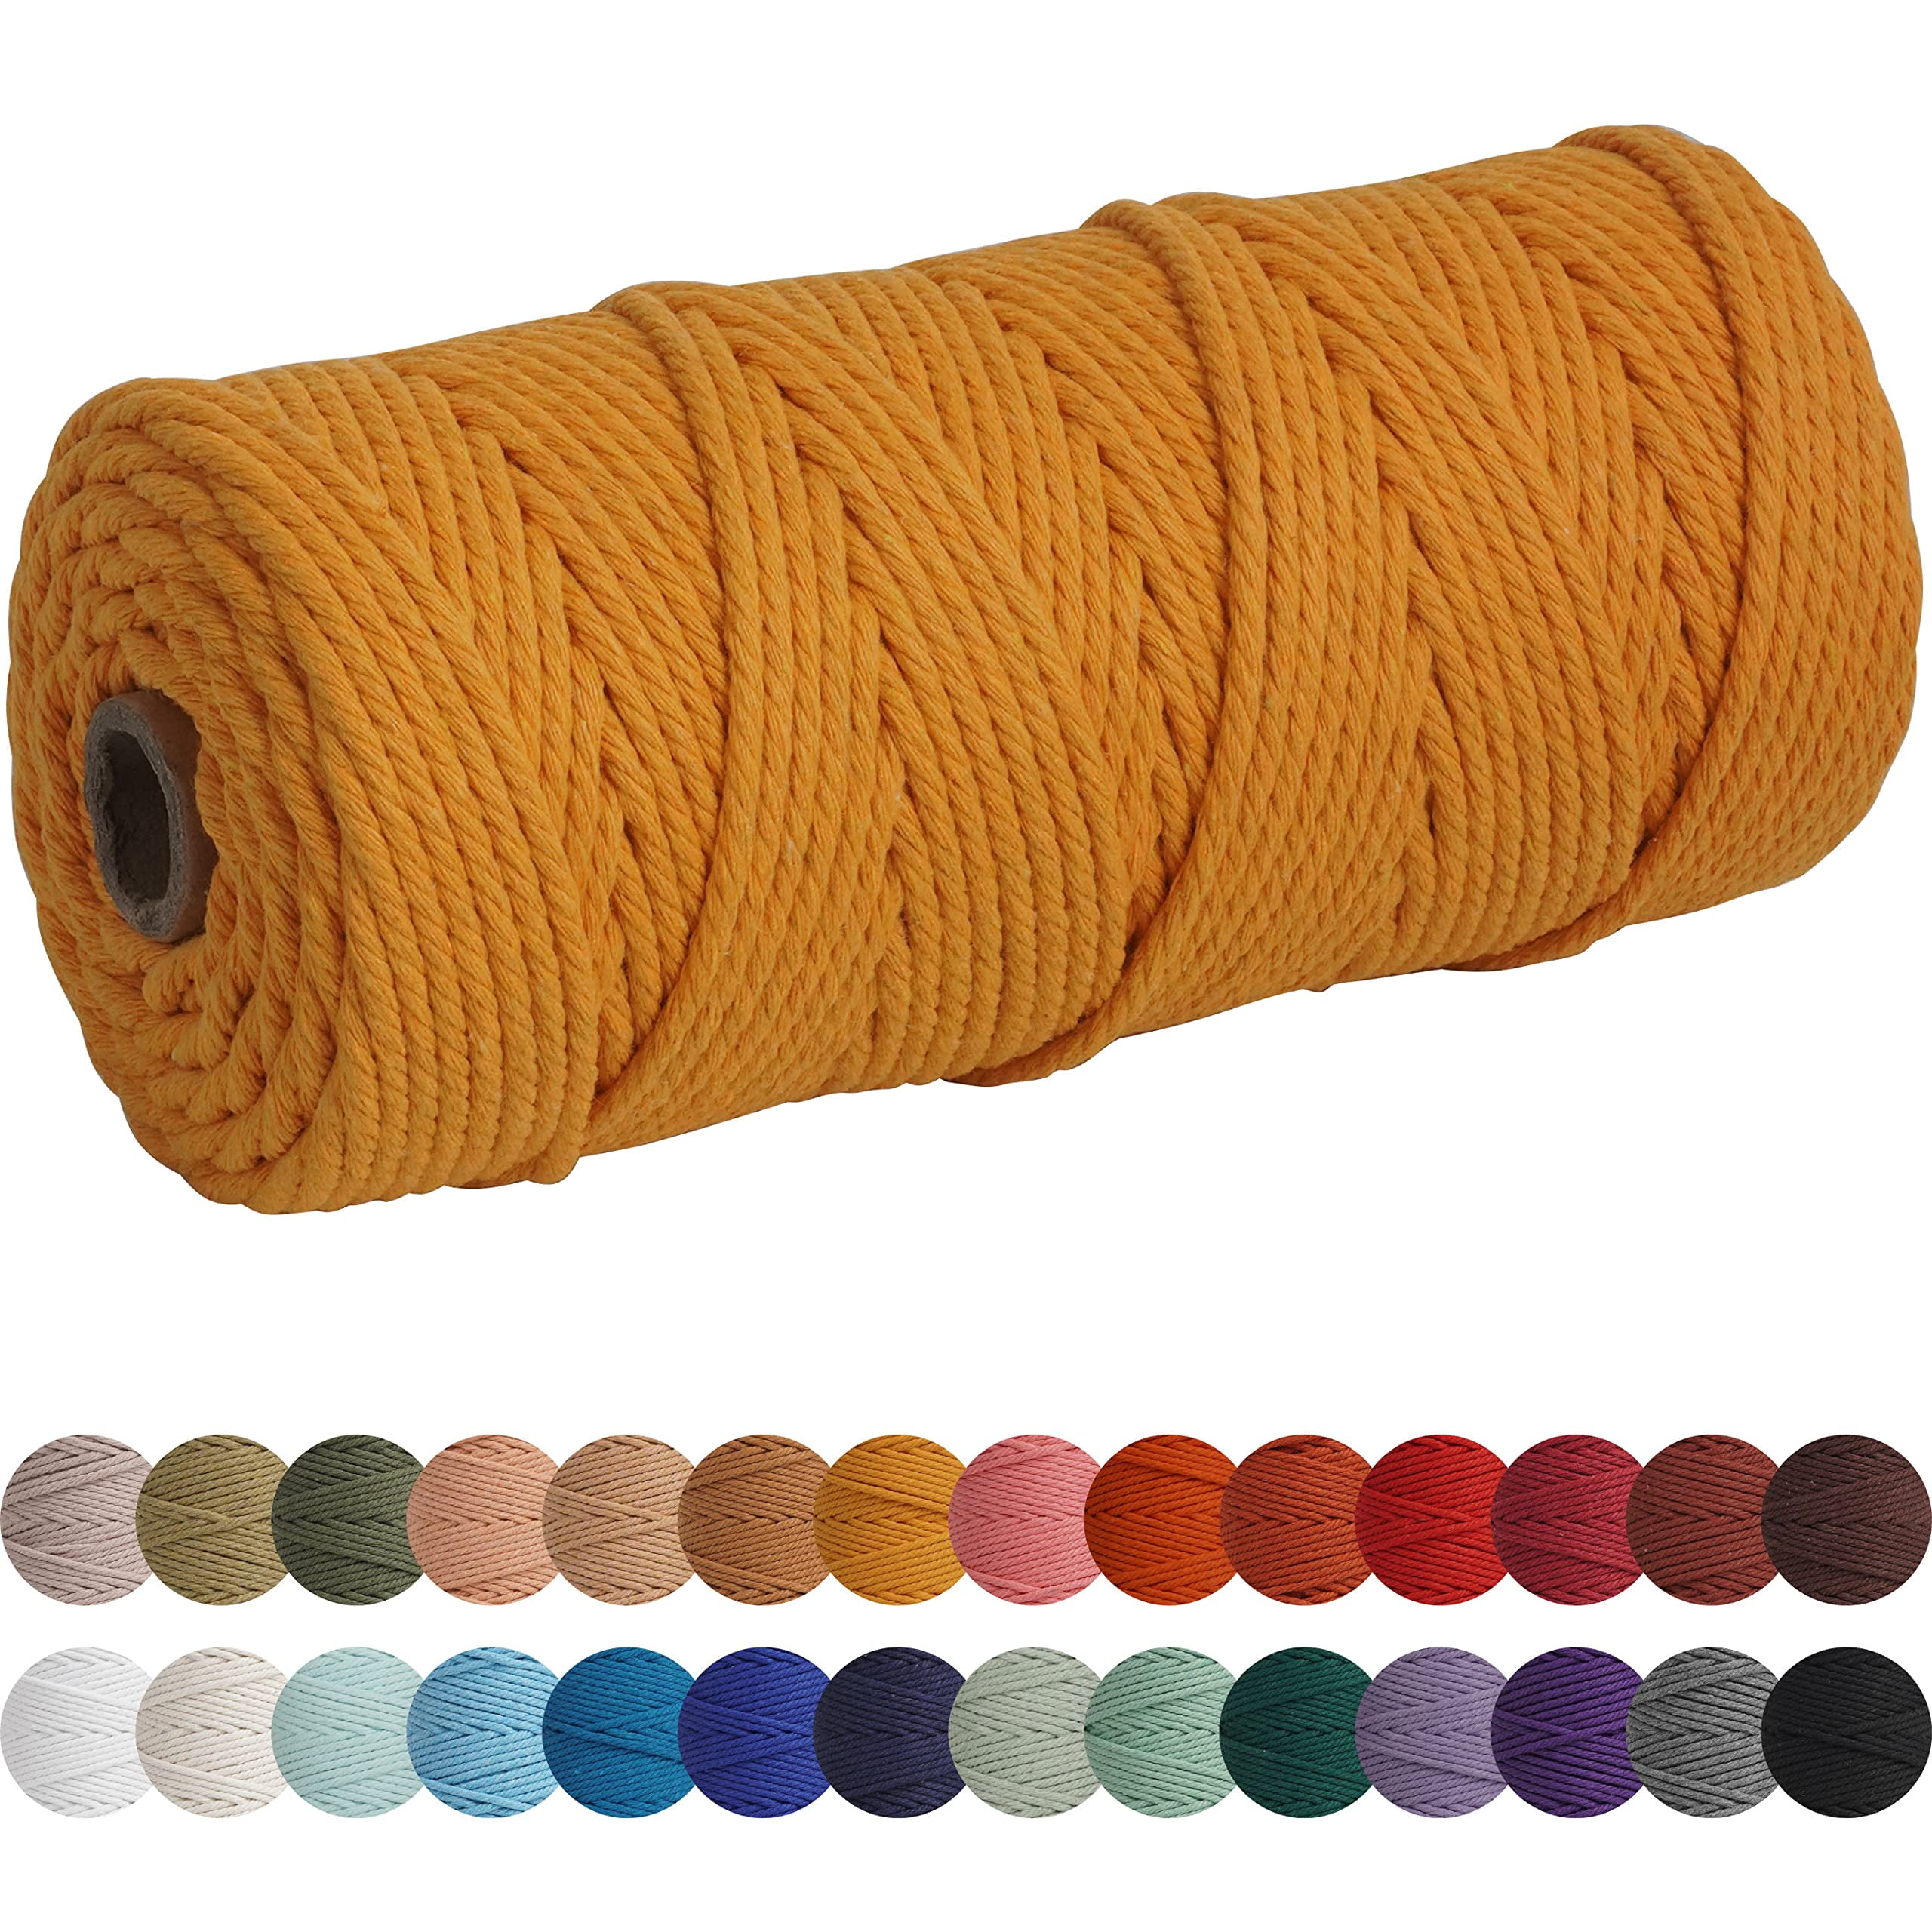 MAOQIAN Macrame Cord 3Mm X 109Yards,Colored Cotton Rope Colorful Cotton  Cord Sof